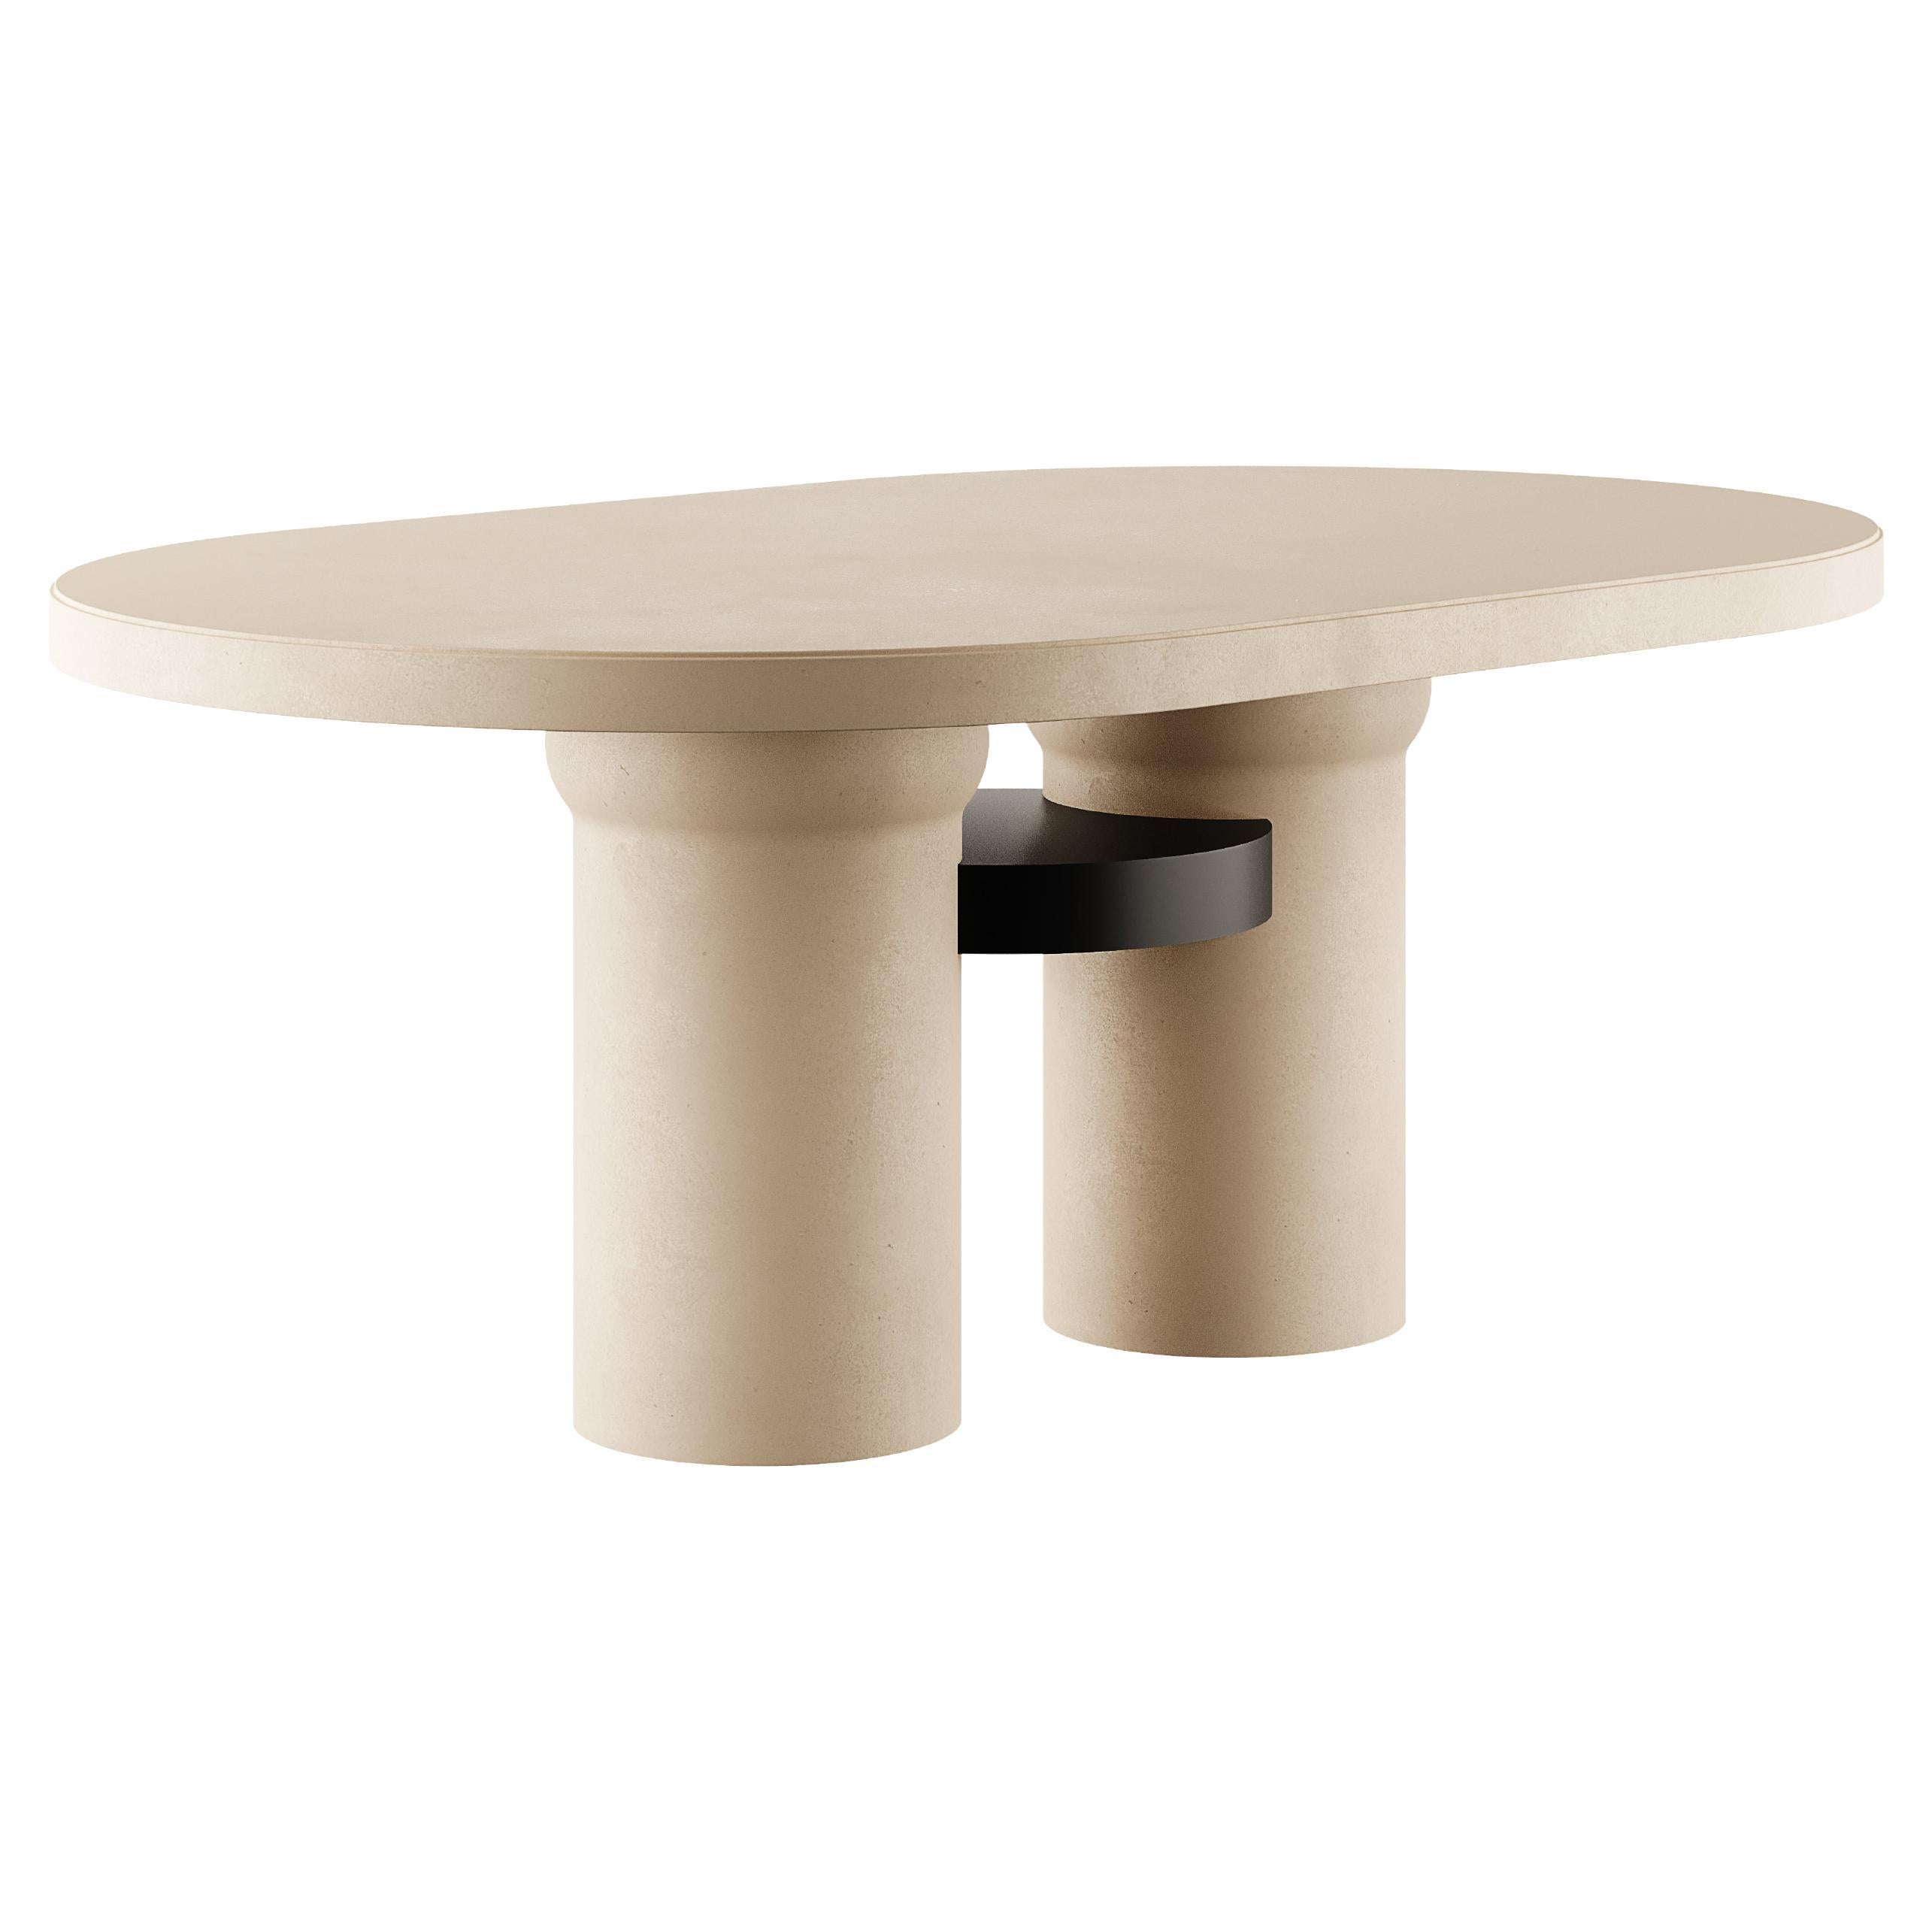 Modern Brutalist Oval Dining Table Microcement Sand & Black Matte Lacquer Detail For Sale